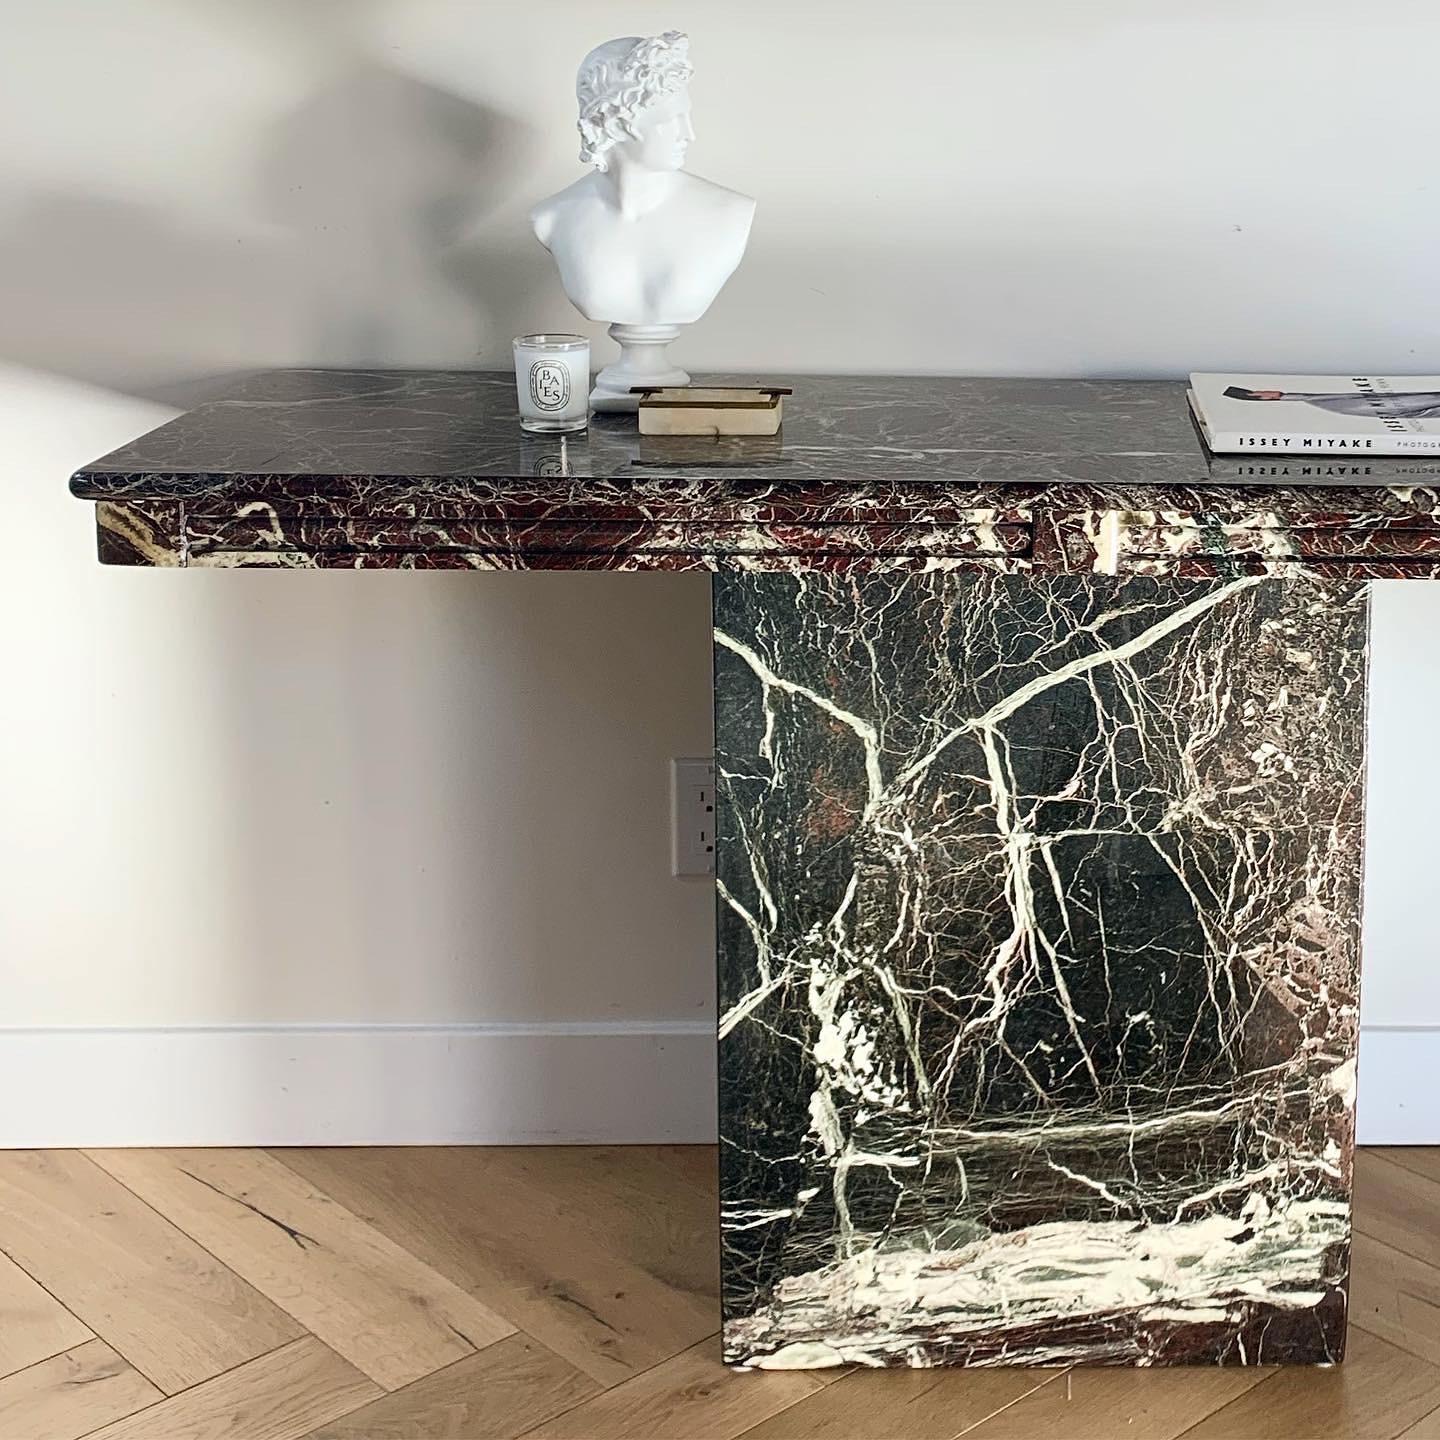 Statuesque vintage Italian marble console table in ebony with cream and and ash veining ft. undertones of burgundy. Made in Italy circa late 1970s. Pleated edge and pedestal base. Fab condition with truly minor signs of age. No losses.